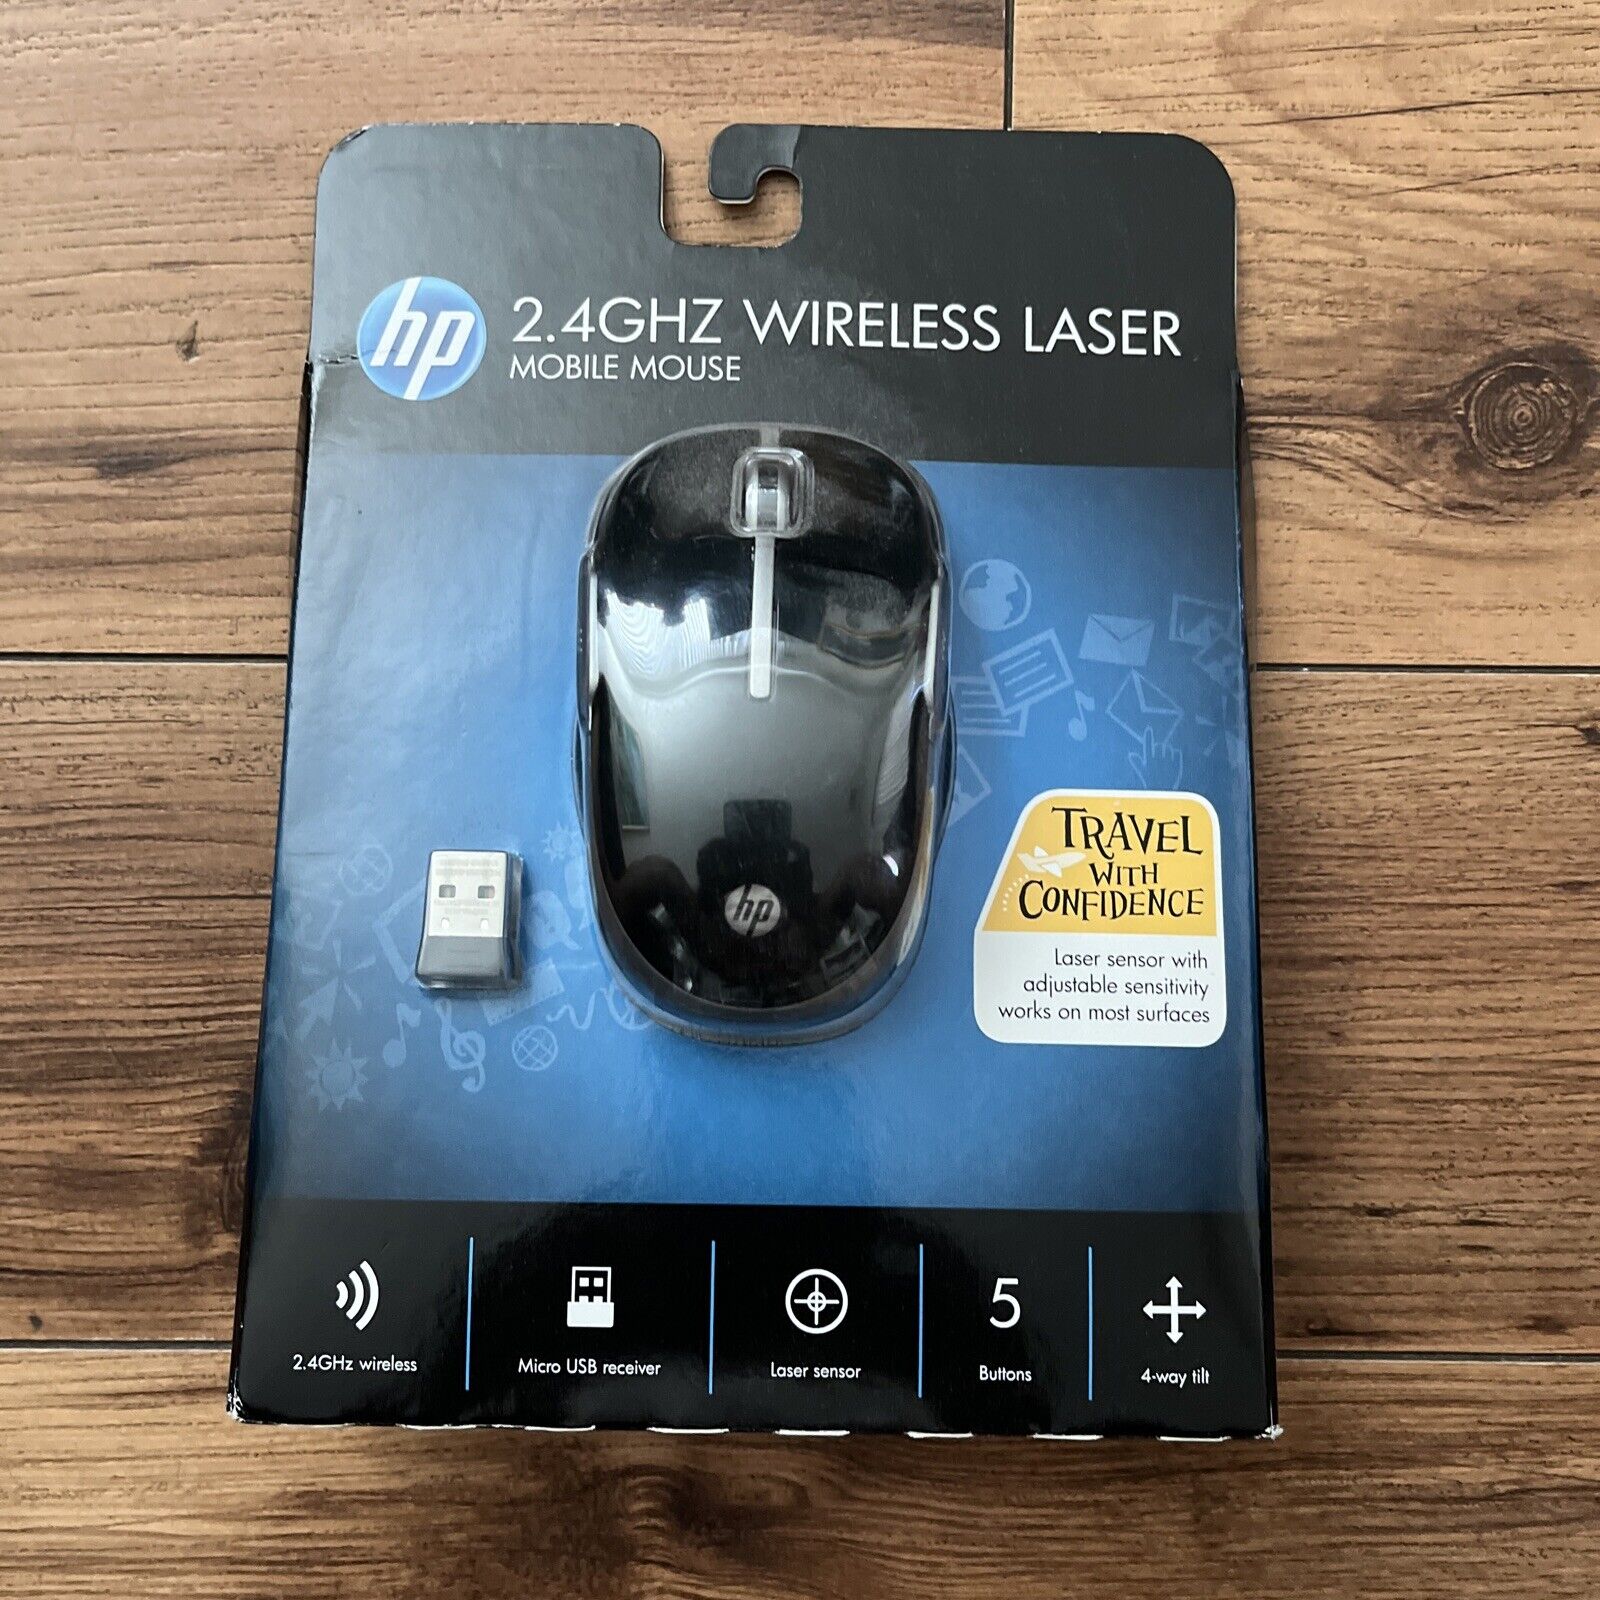 New HP 2.4GHz Wireless Laser Sensor Mouse VK482AA For Laptops and PCs